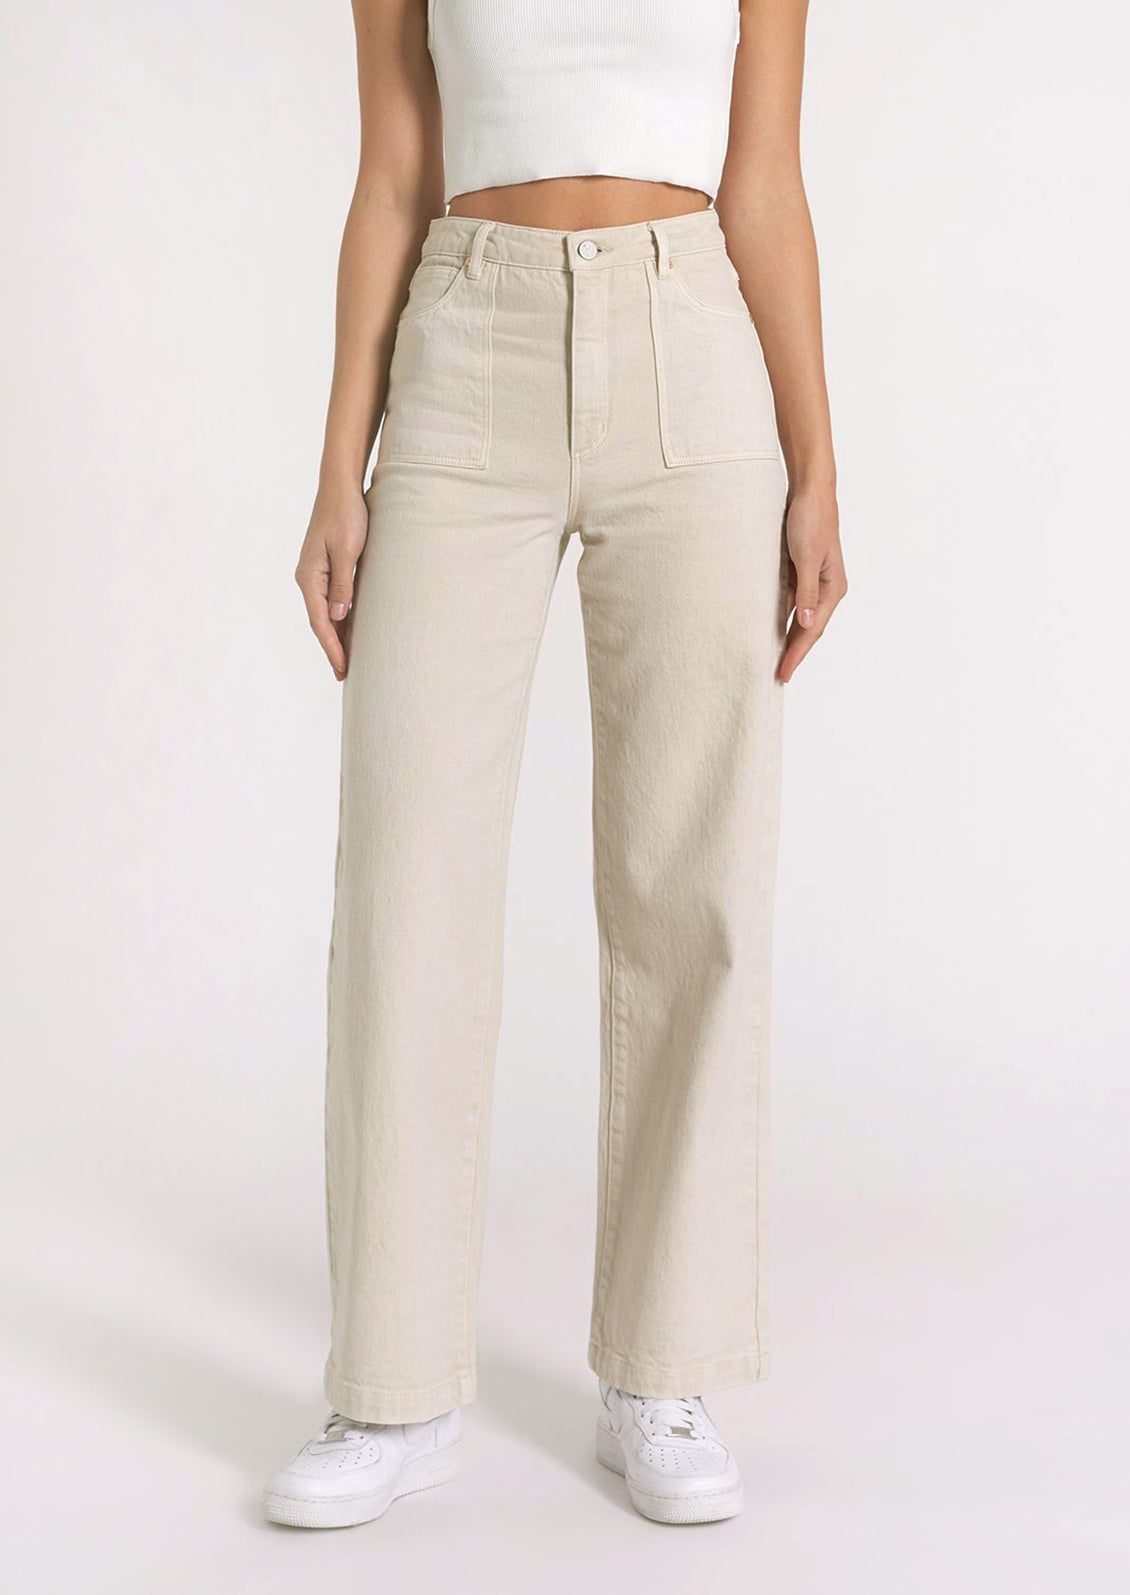 Cream colored denim jeans with high rise and front patch pockets.